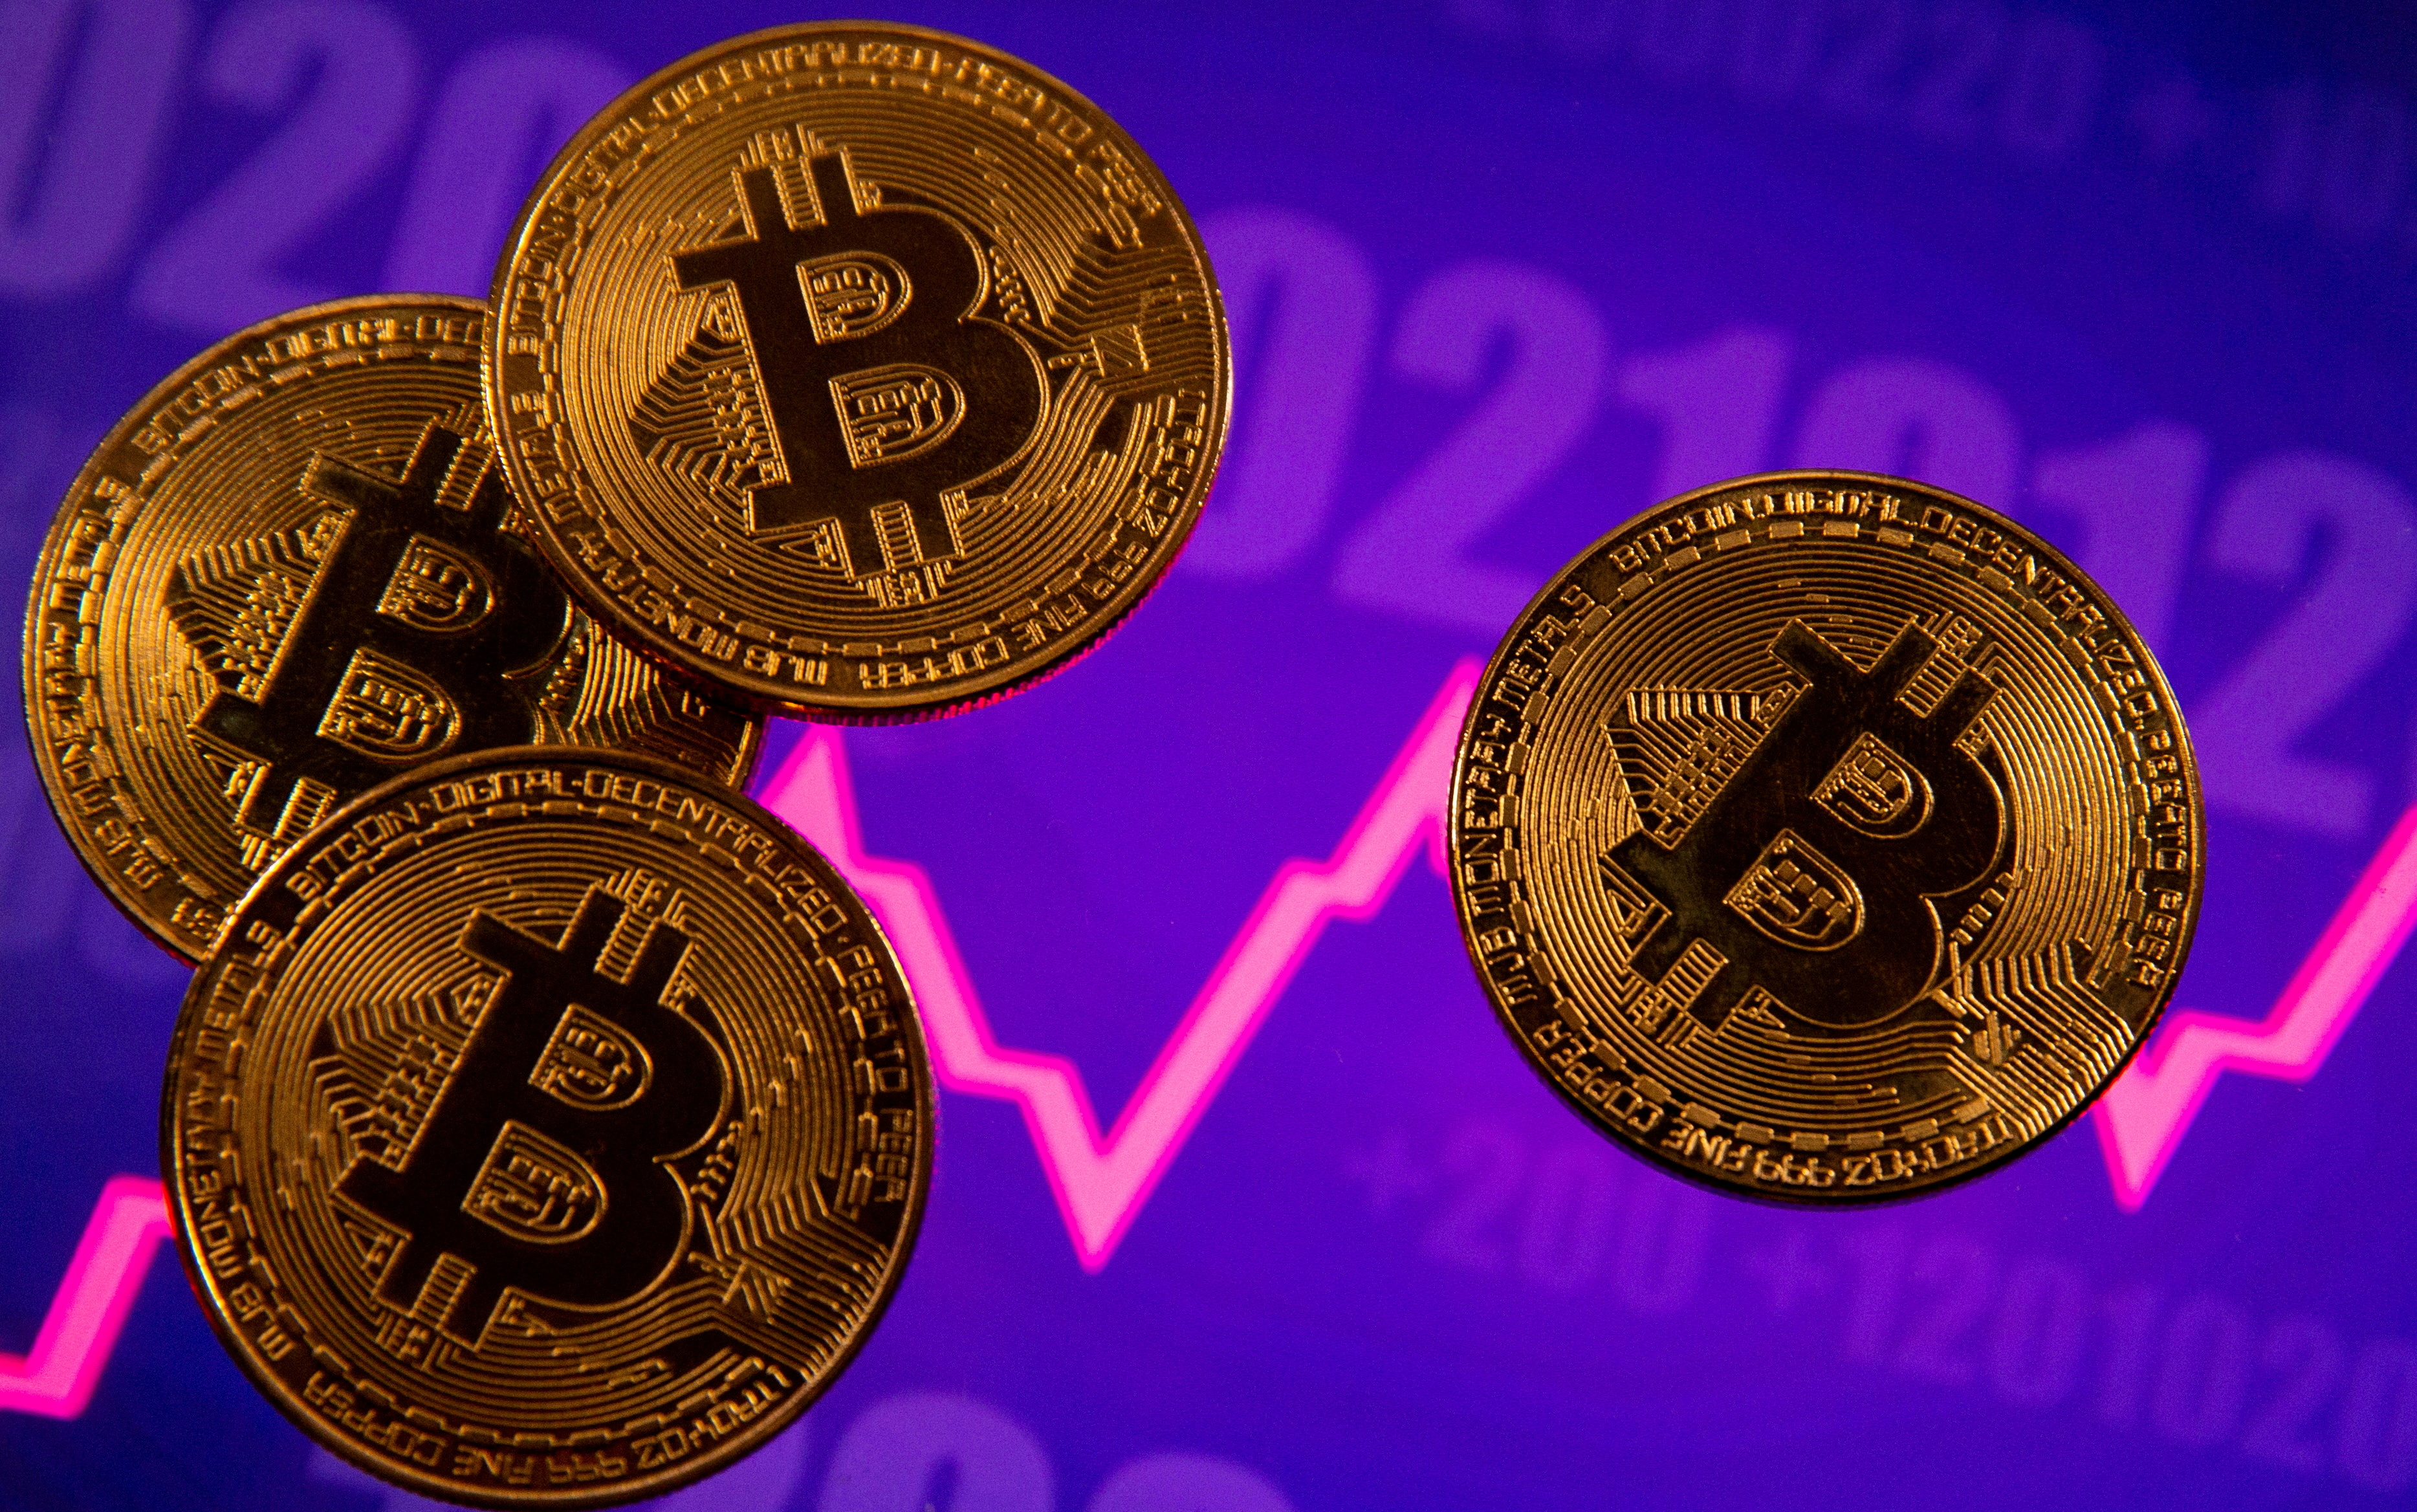 A representation of virtual currency Bitcoin is seen in front of a stock graph